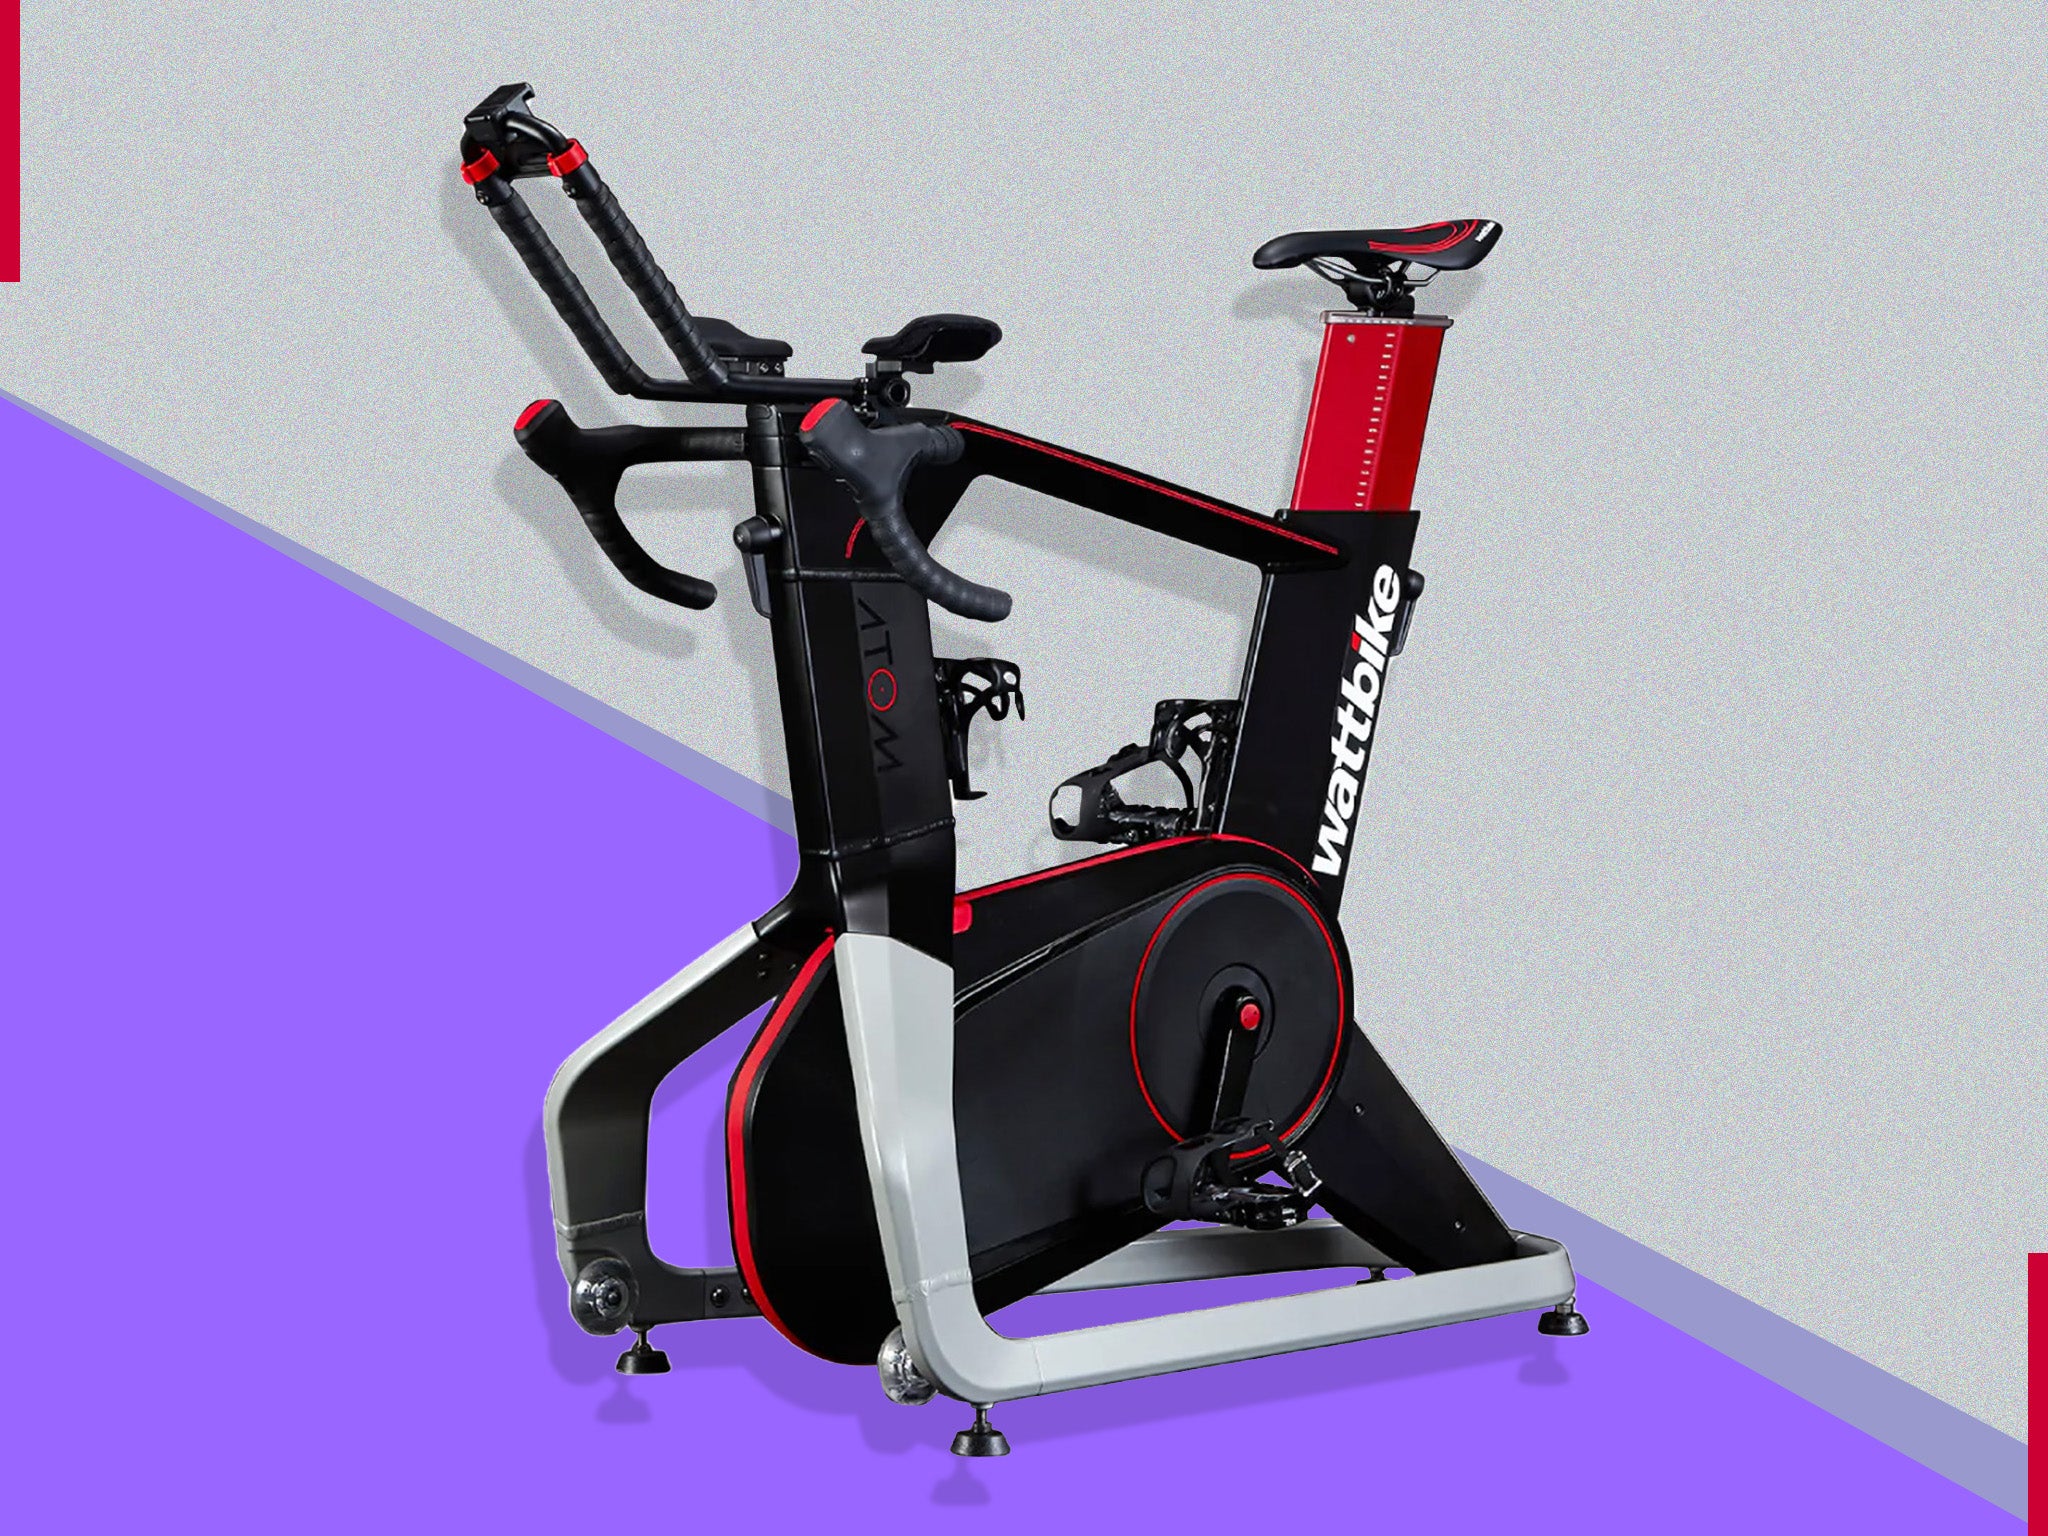 We originally included it in our guide to the best exercise bikes